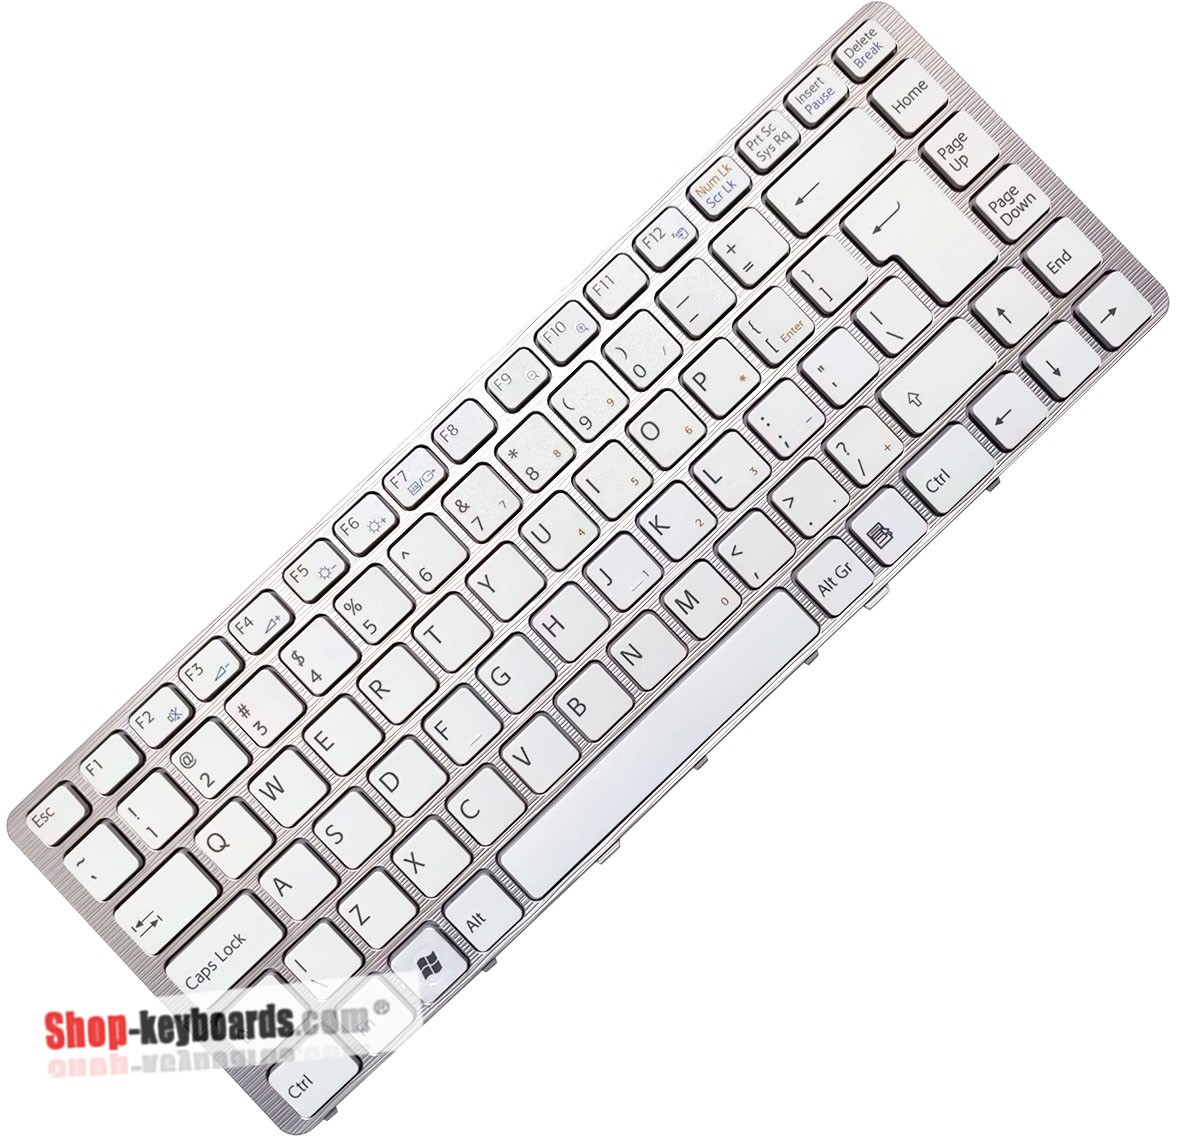 Sony 148738351 Keyboard replacement